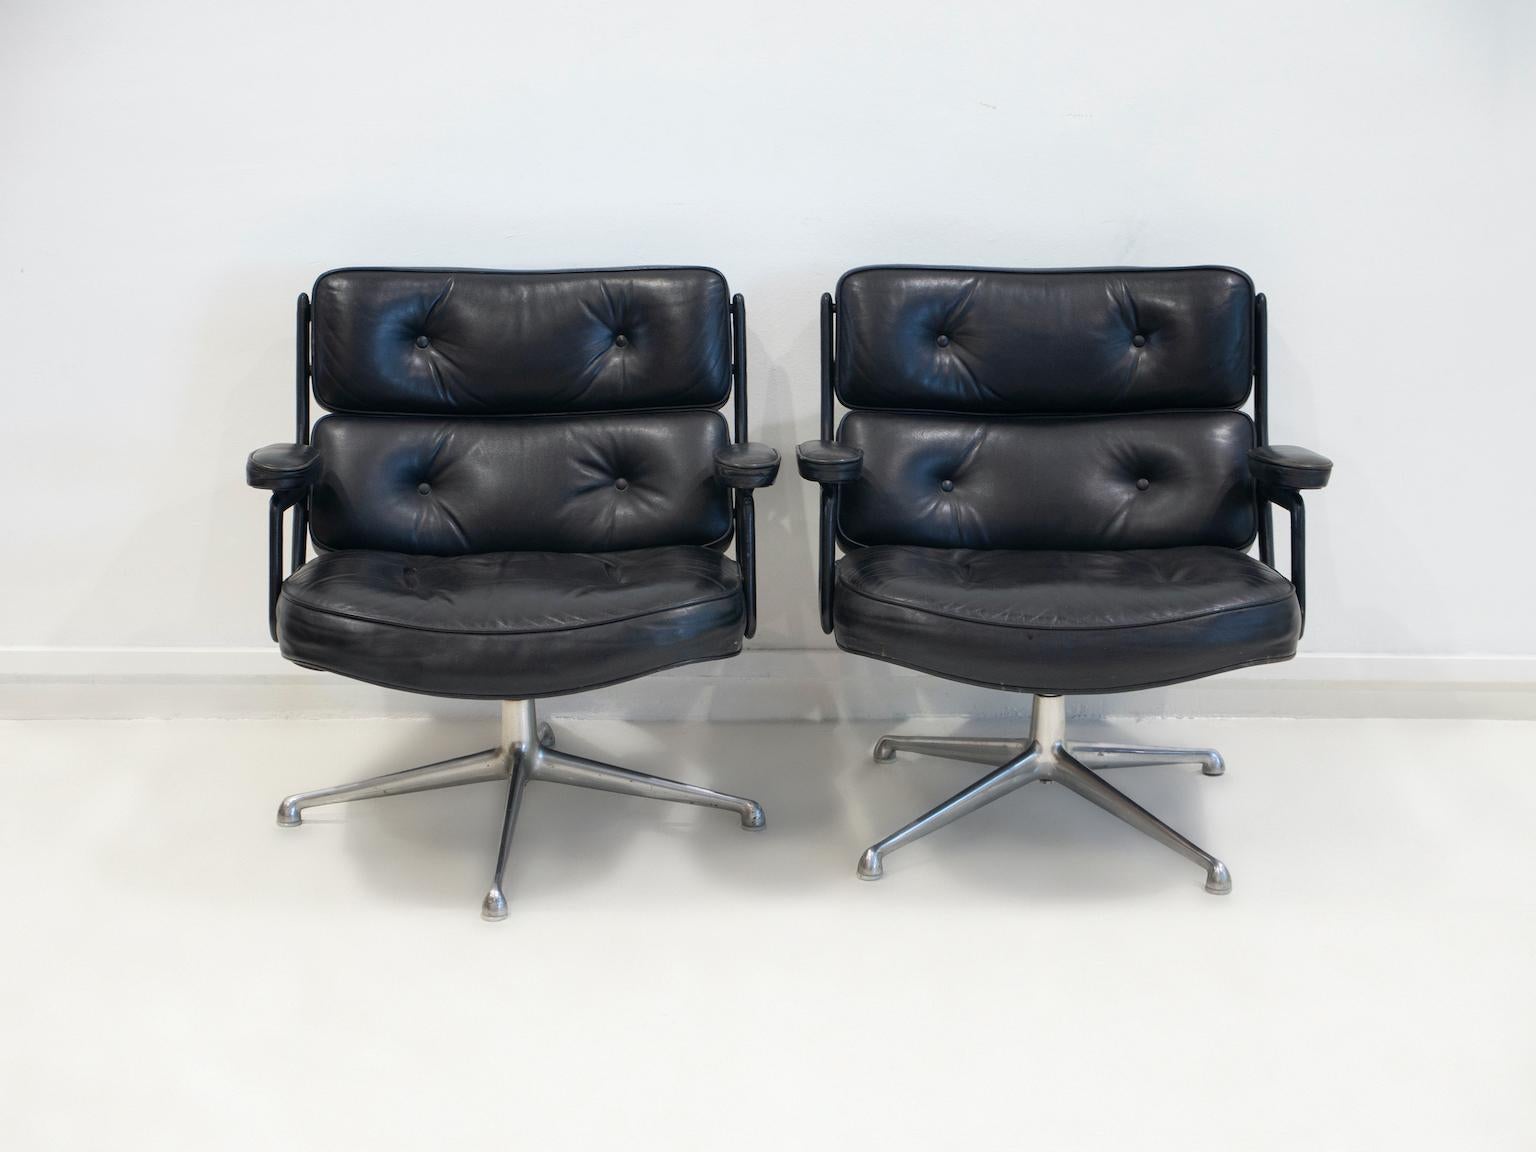 Pair of black leather upholstered swivel armchairs, model ES 108, designed by Charles & Ray Eames, manufactured by Vitra. 
The Lobby chair was designed in 1960 for the reception areas of the Time Life building in New York. 
Polished aluminum